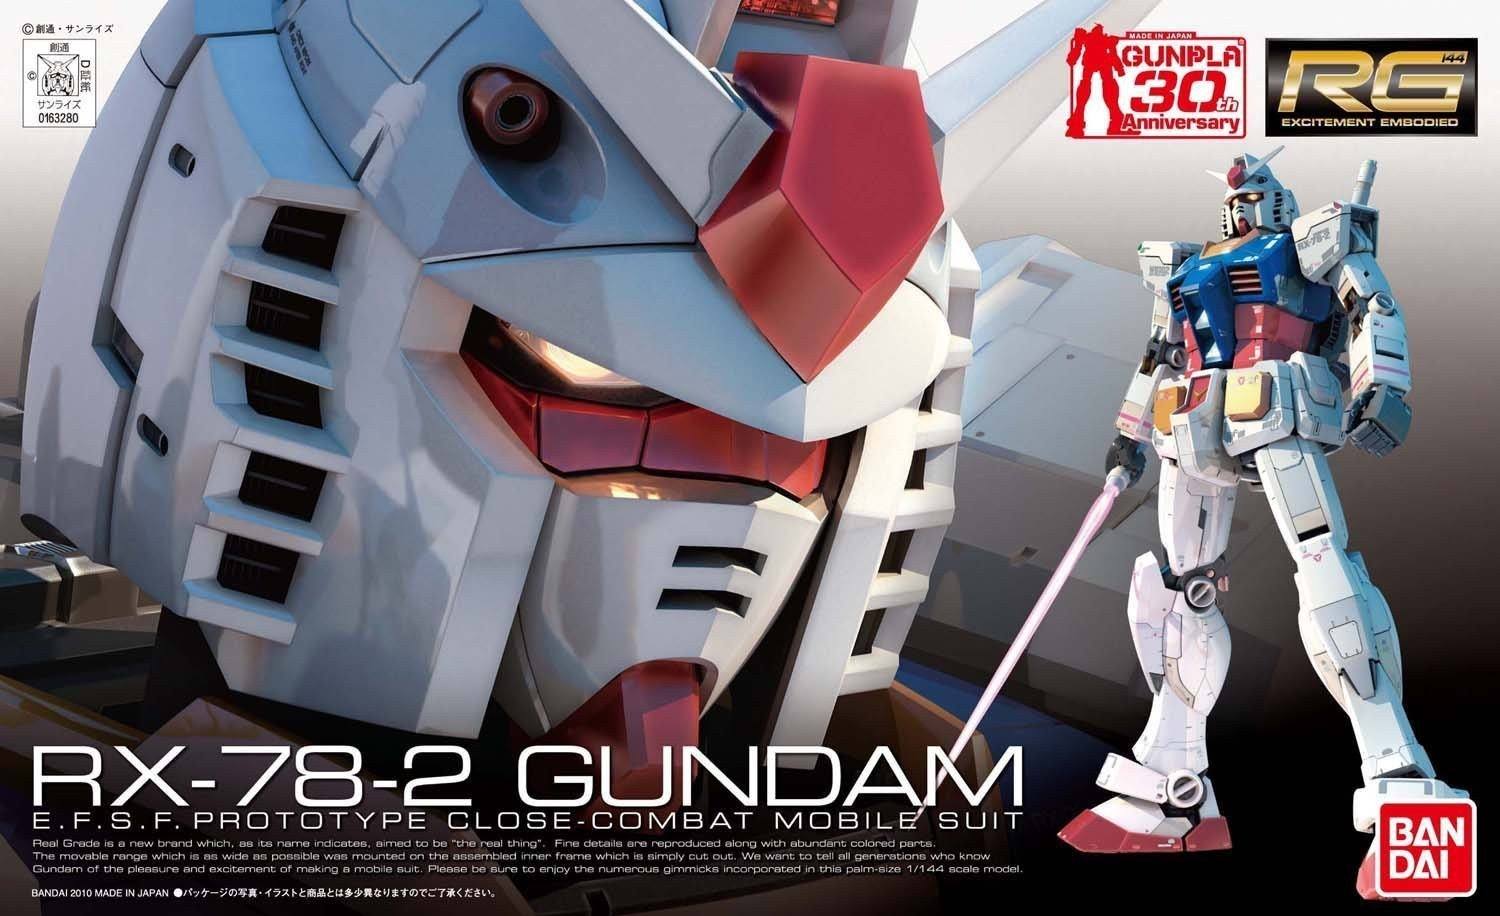 Collectors Marketplace - Just restocked our Real Grade Gundam model kits!  Master Grade detail at High Grade scale! The original RX-78-2 and both  Char's and the grunt Zaku II, the Unicorn and